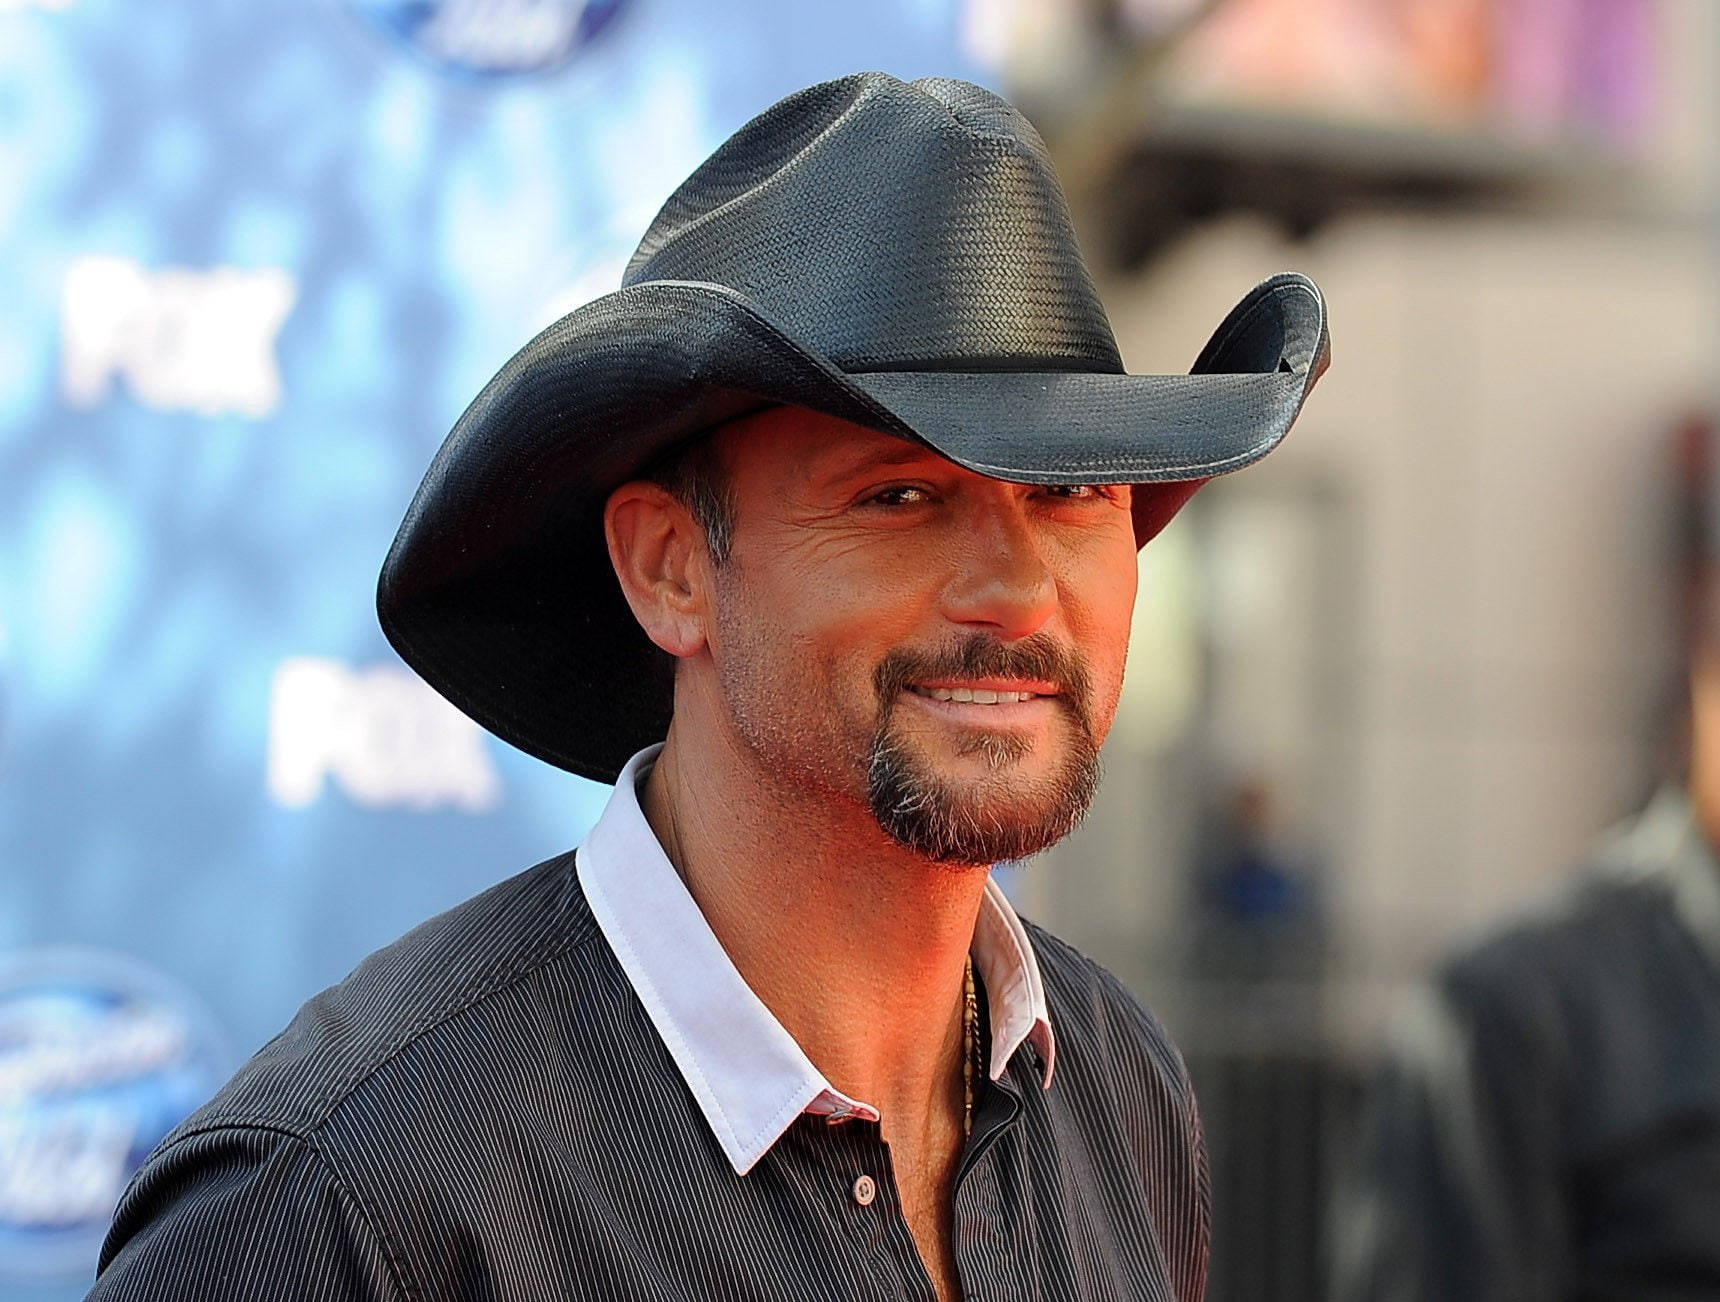 Tim Mcgraw Performing At The American Idol Grand Finale 2011 Wallpaper